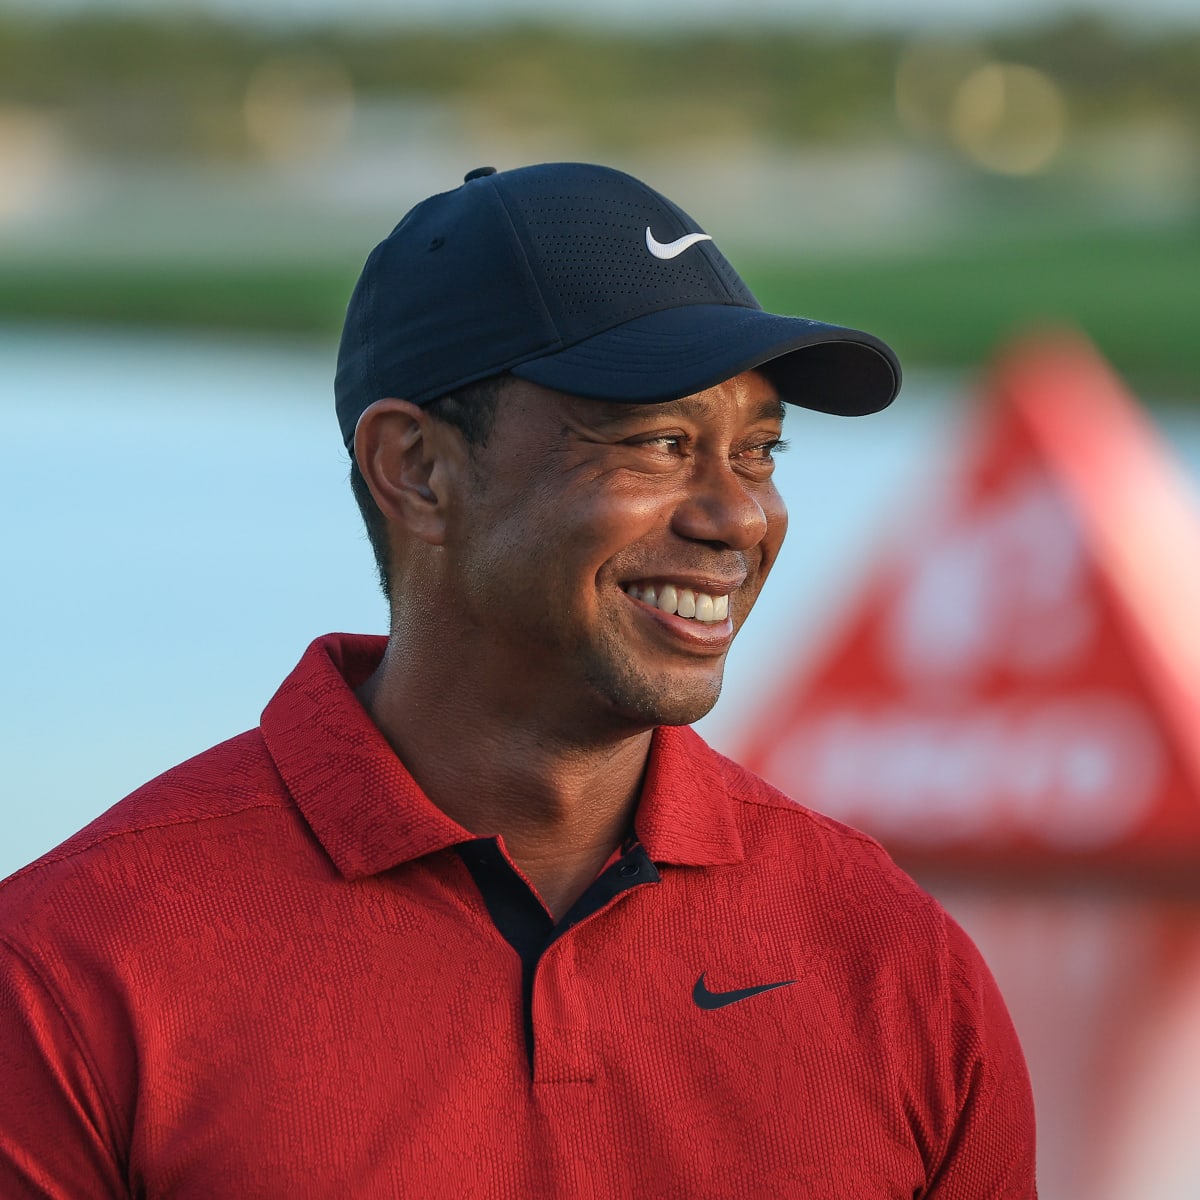 Woods leaves opening in Hero World Challenge field with his status